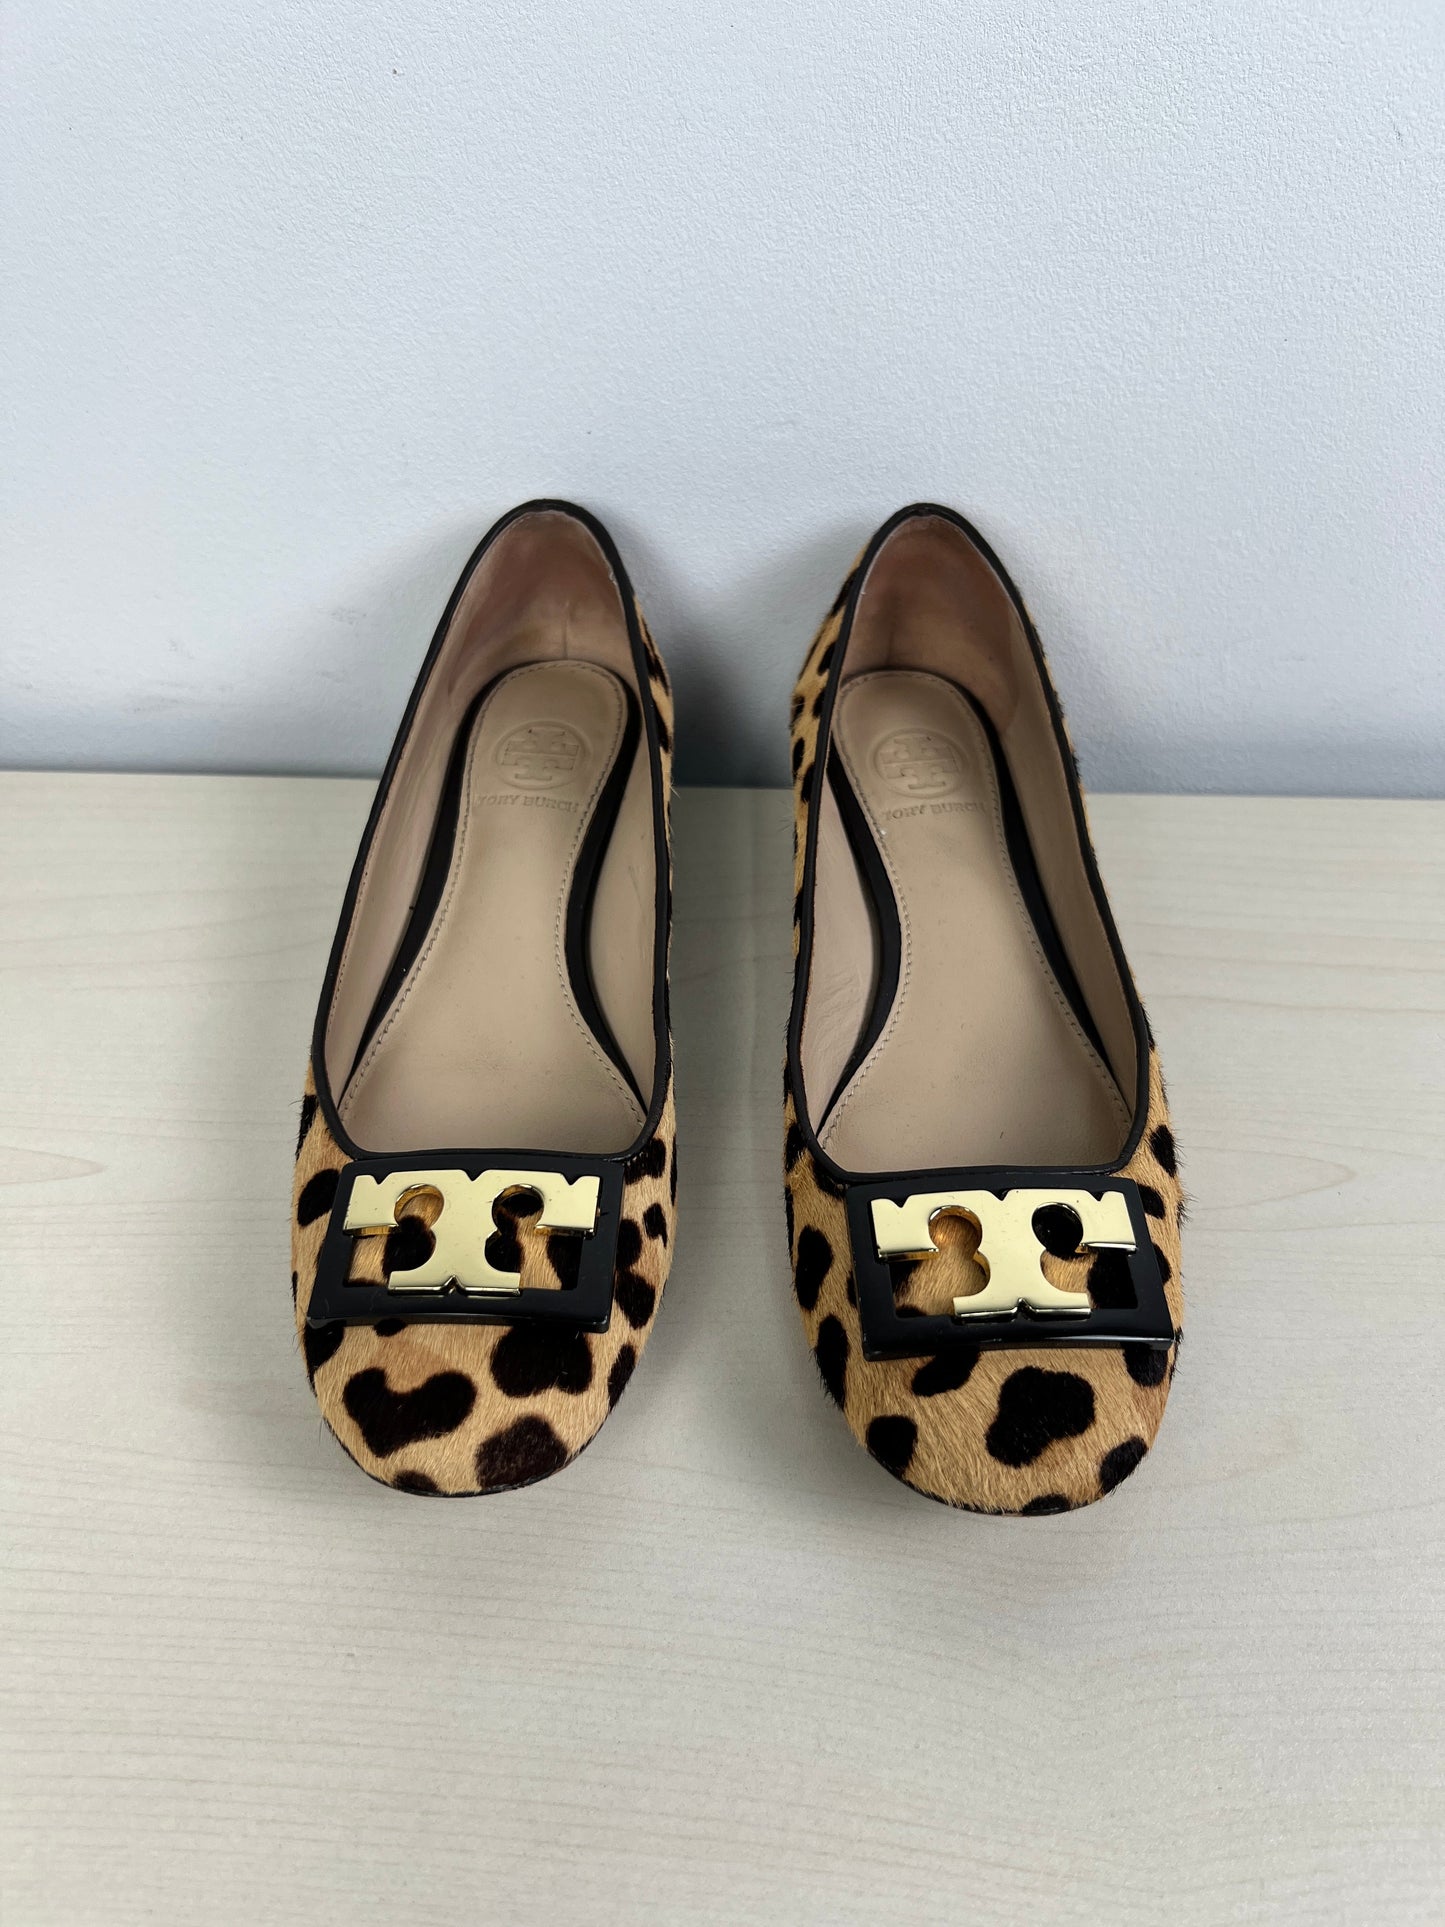 Shoes Designer By Tory Burch  Size: 5